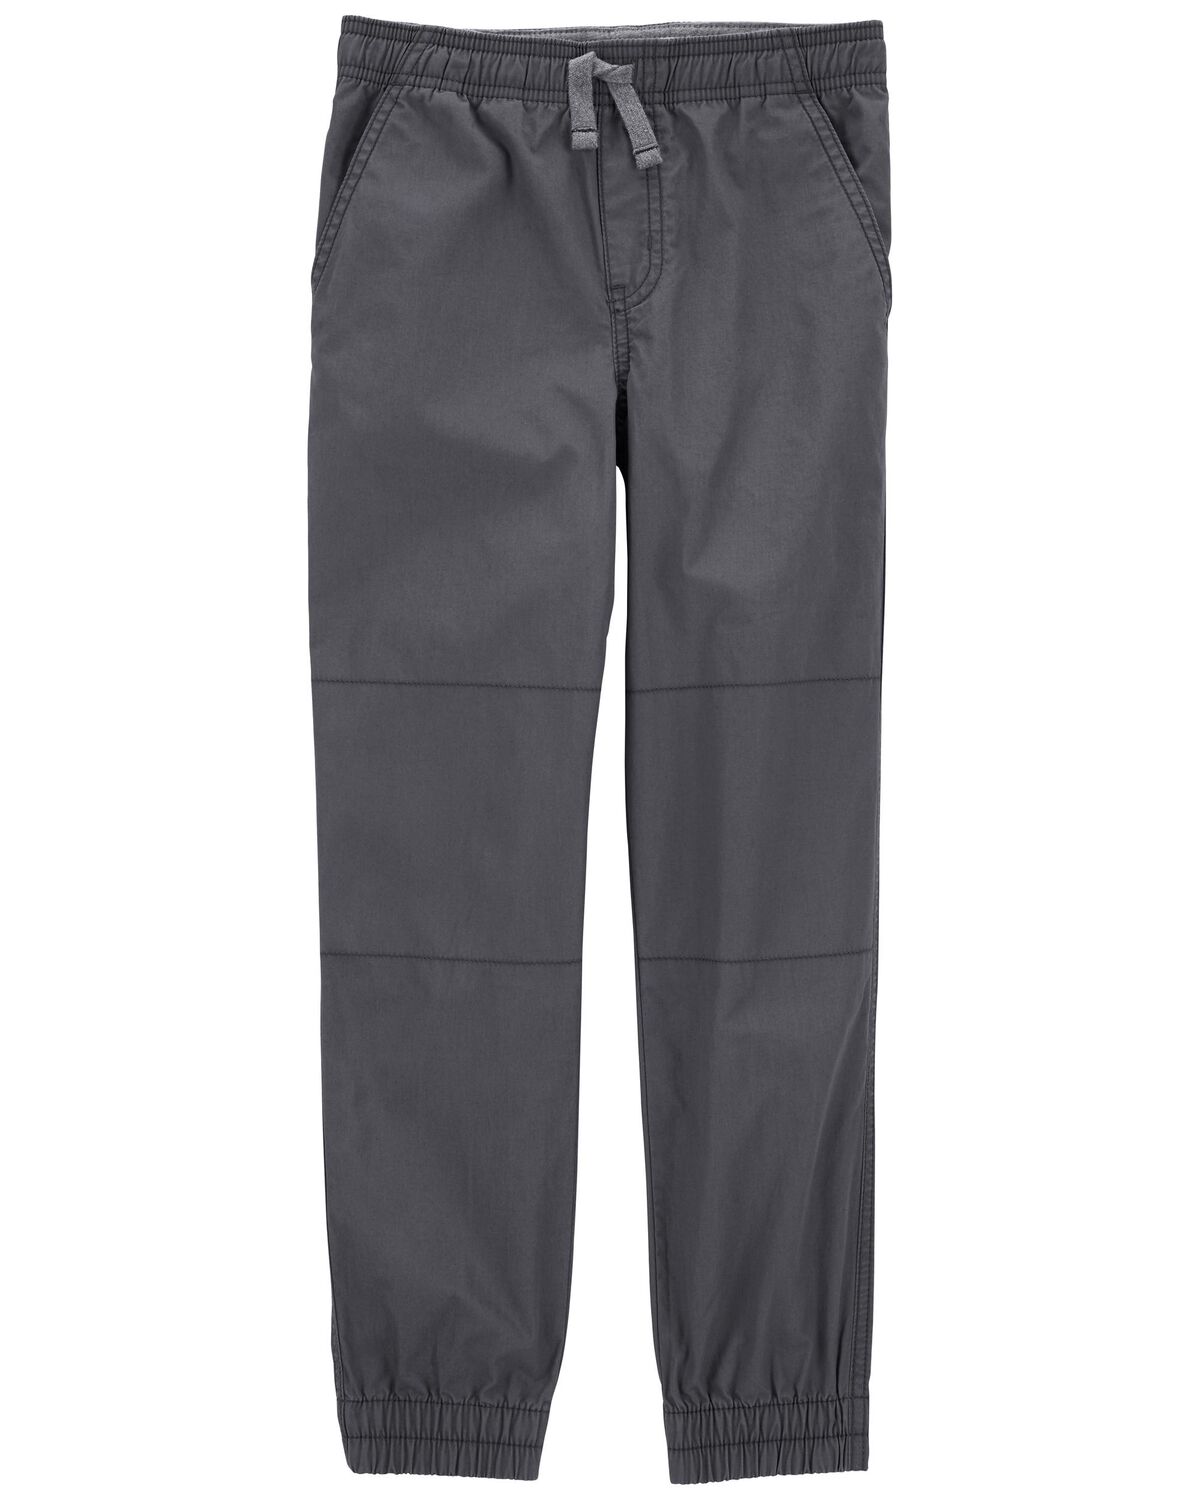 Grey Kid Everyday Pull-On Pants | carters.com